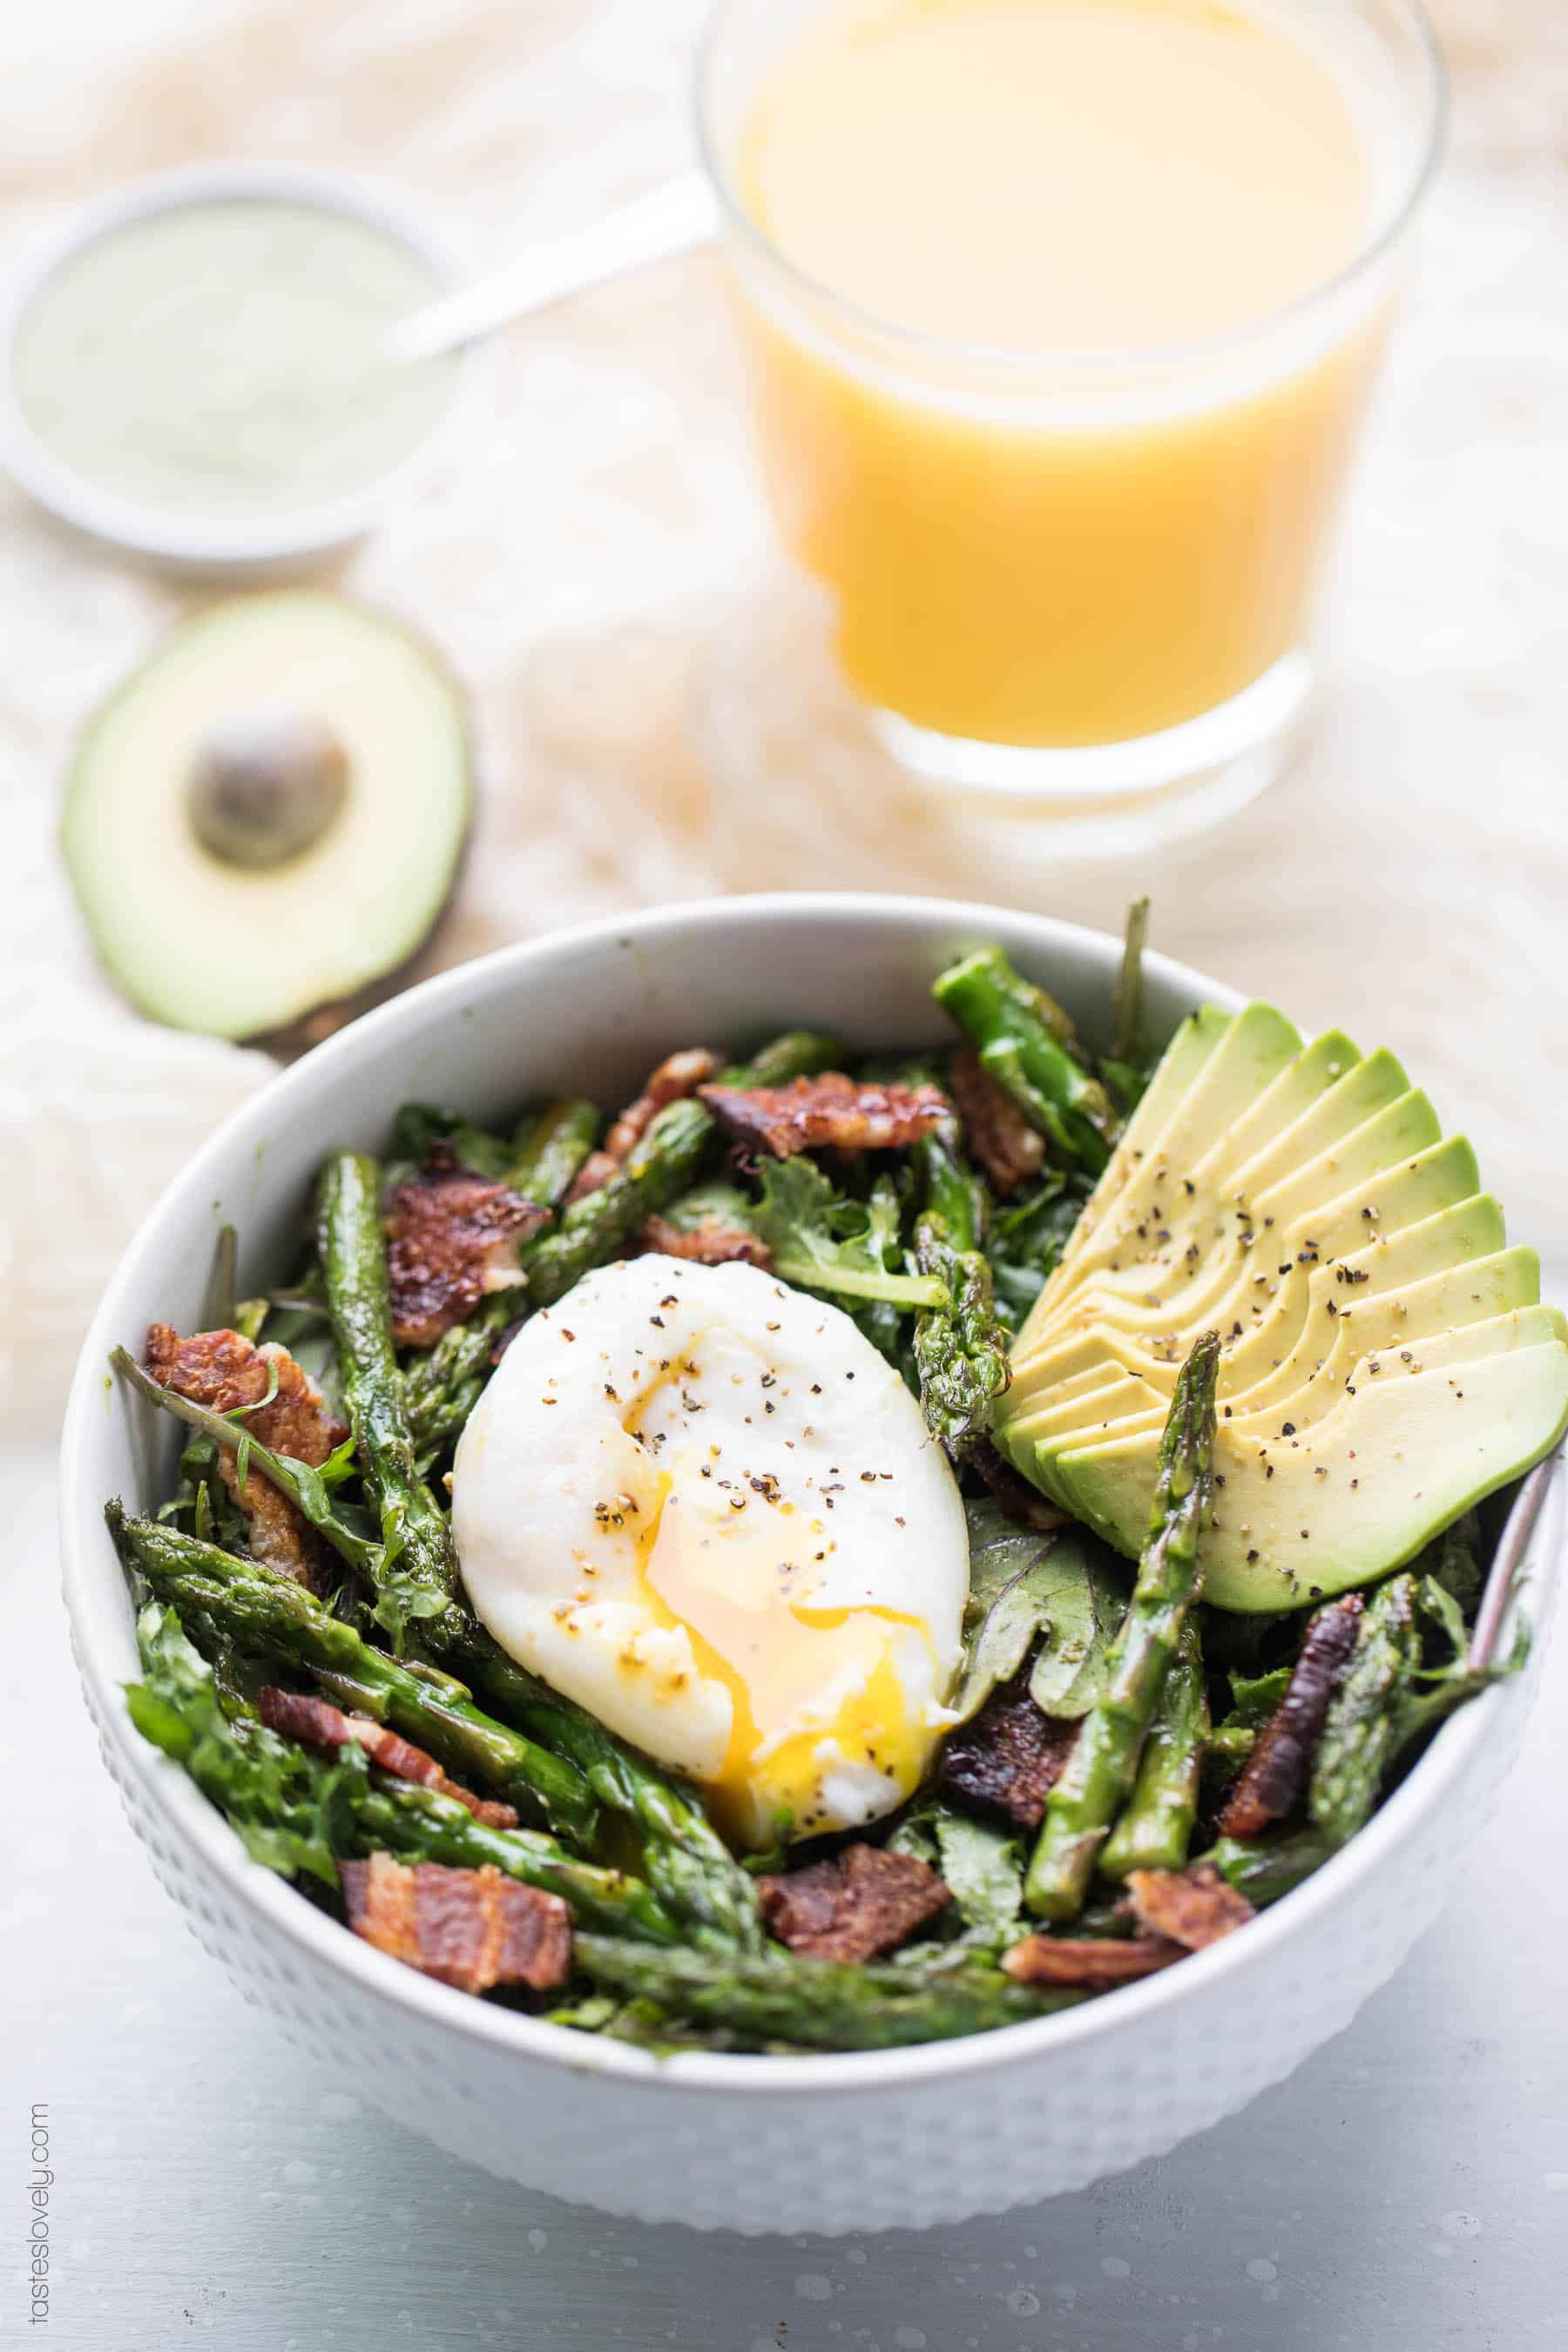 Paleo + Whole30 Brunch Kale Salad - baby kale tossed in an herby green dressing topped with bacon, asparagus and a poached egg (gluten free, grain free, dairy free, sugar free, clean eating)